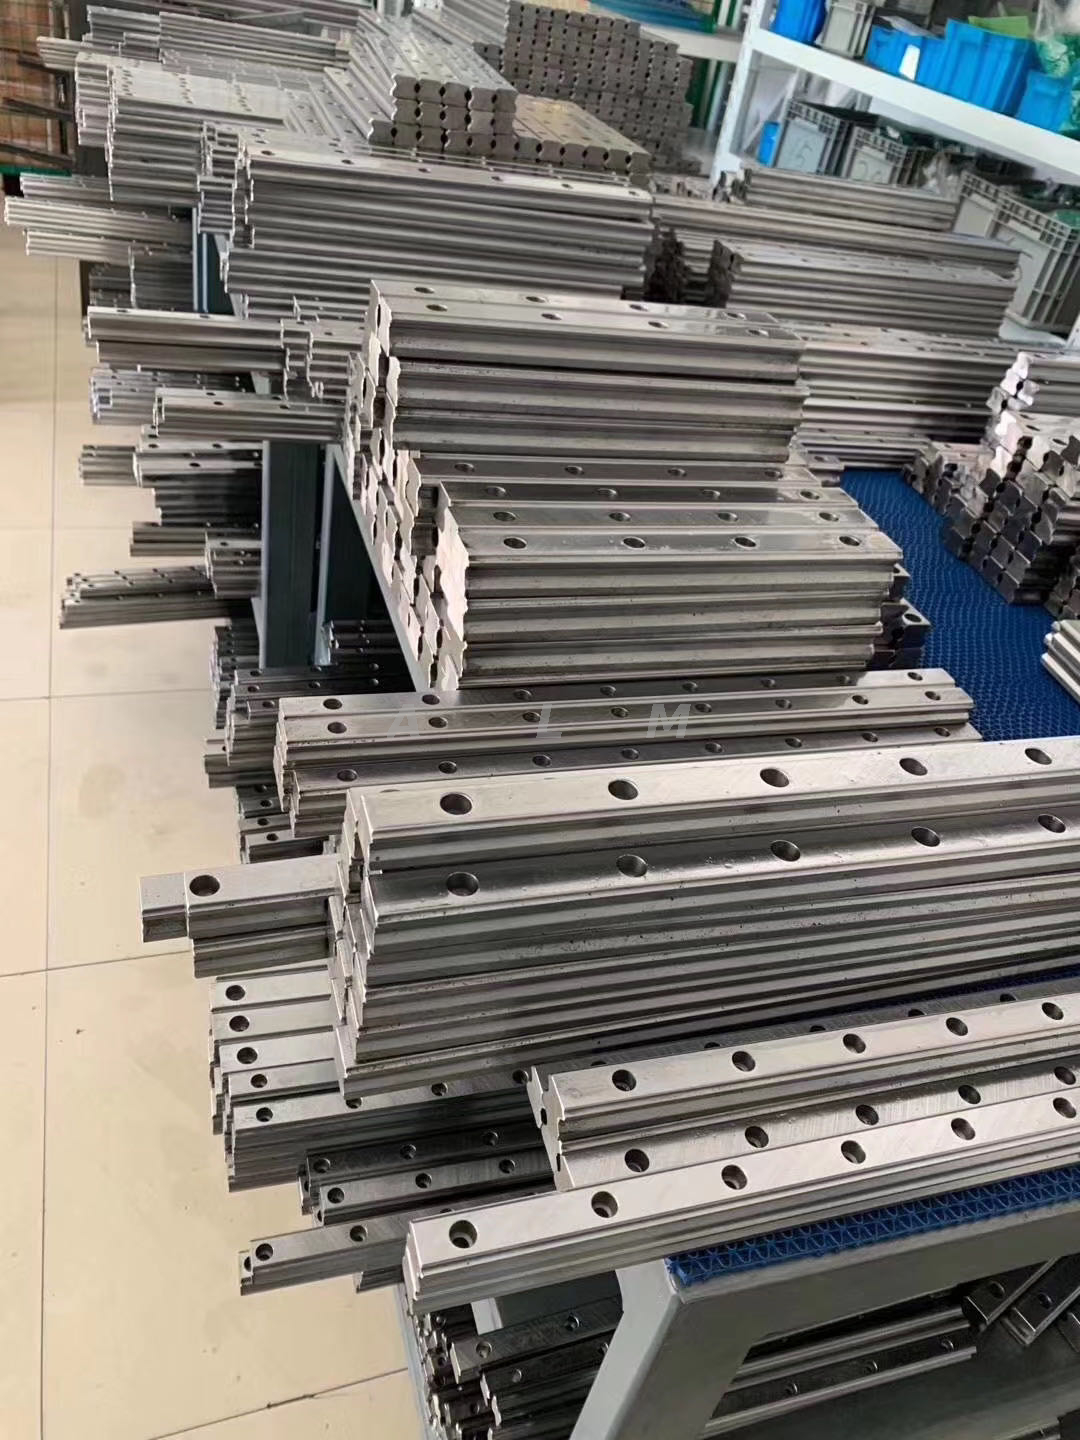 EGH20CA Linear Slider And Linear Rail for Laser Engraving Machine